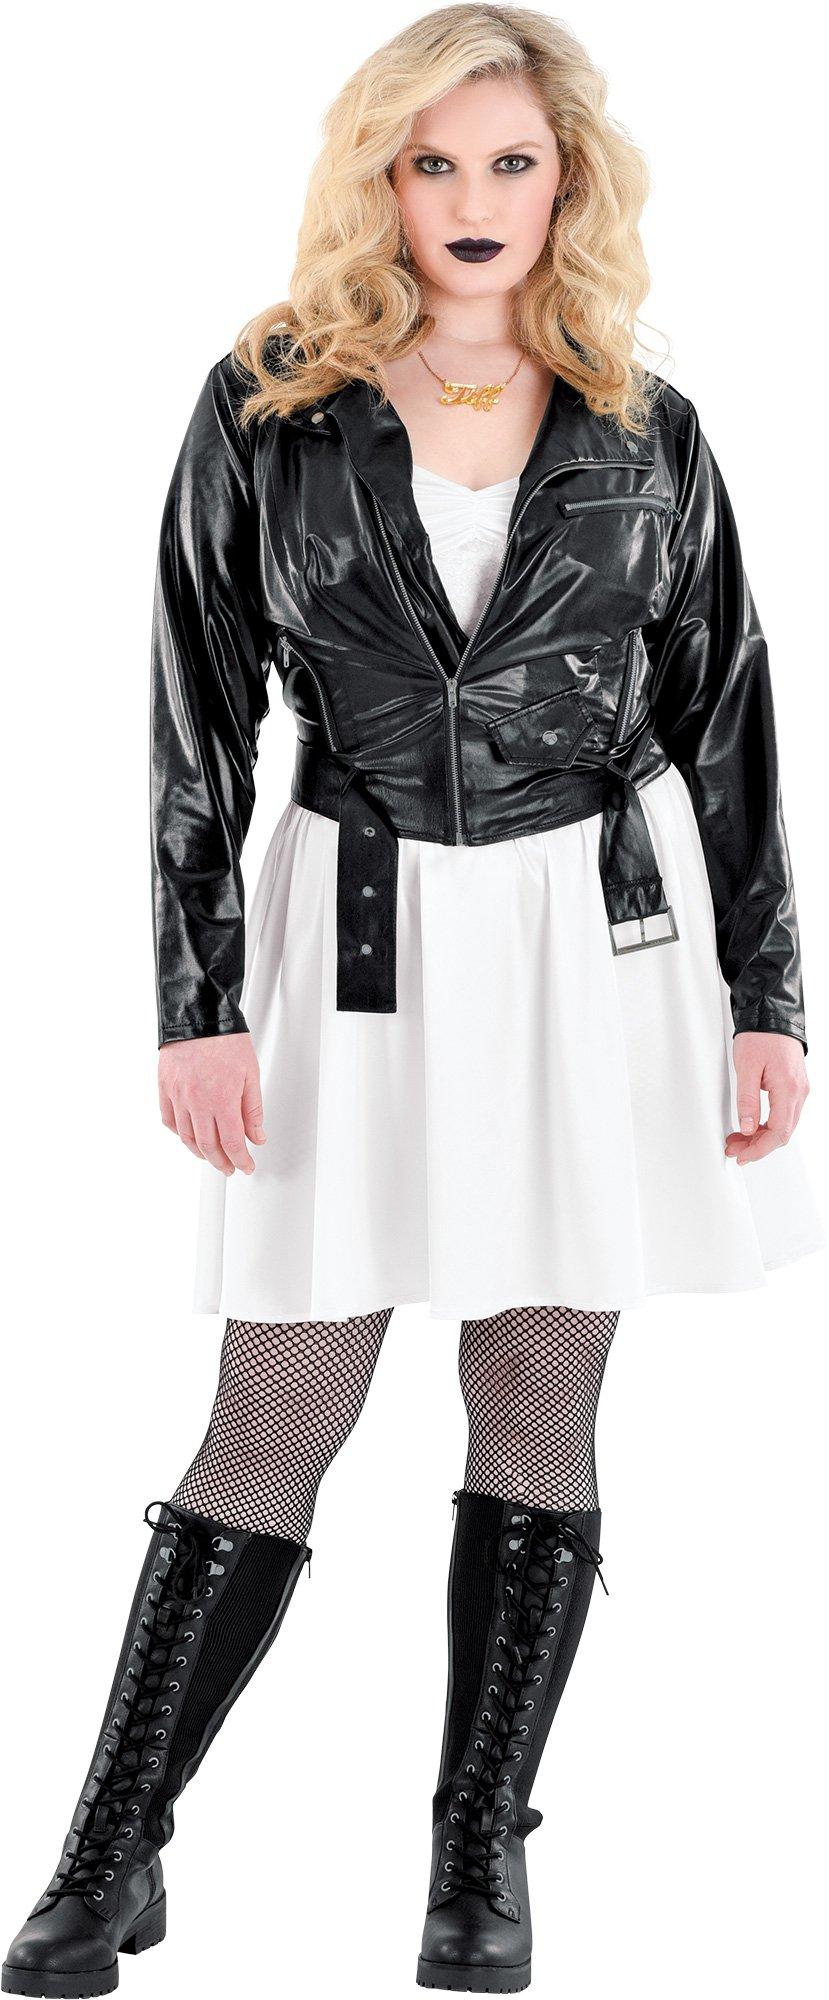 Adult Bride of Chucky Plus Size Costume